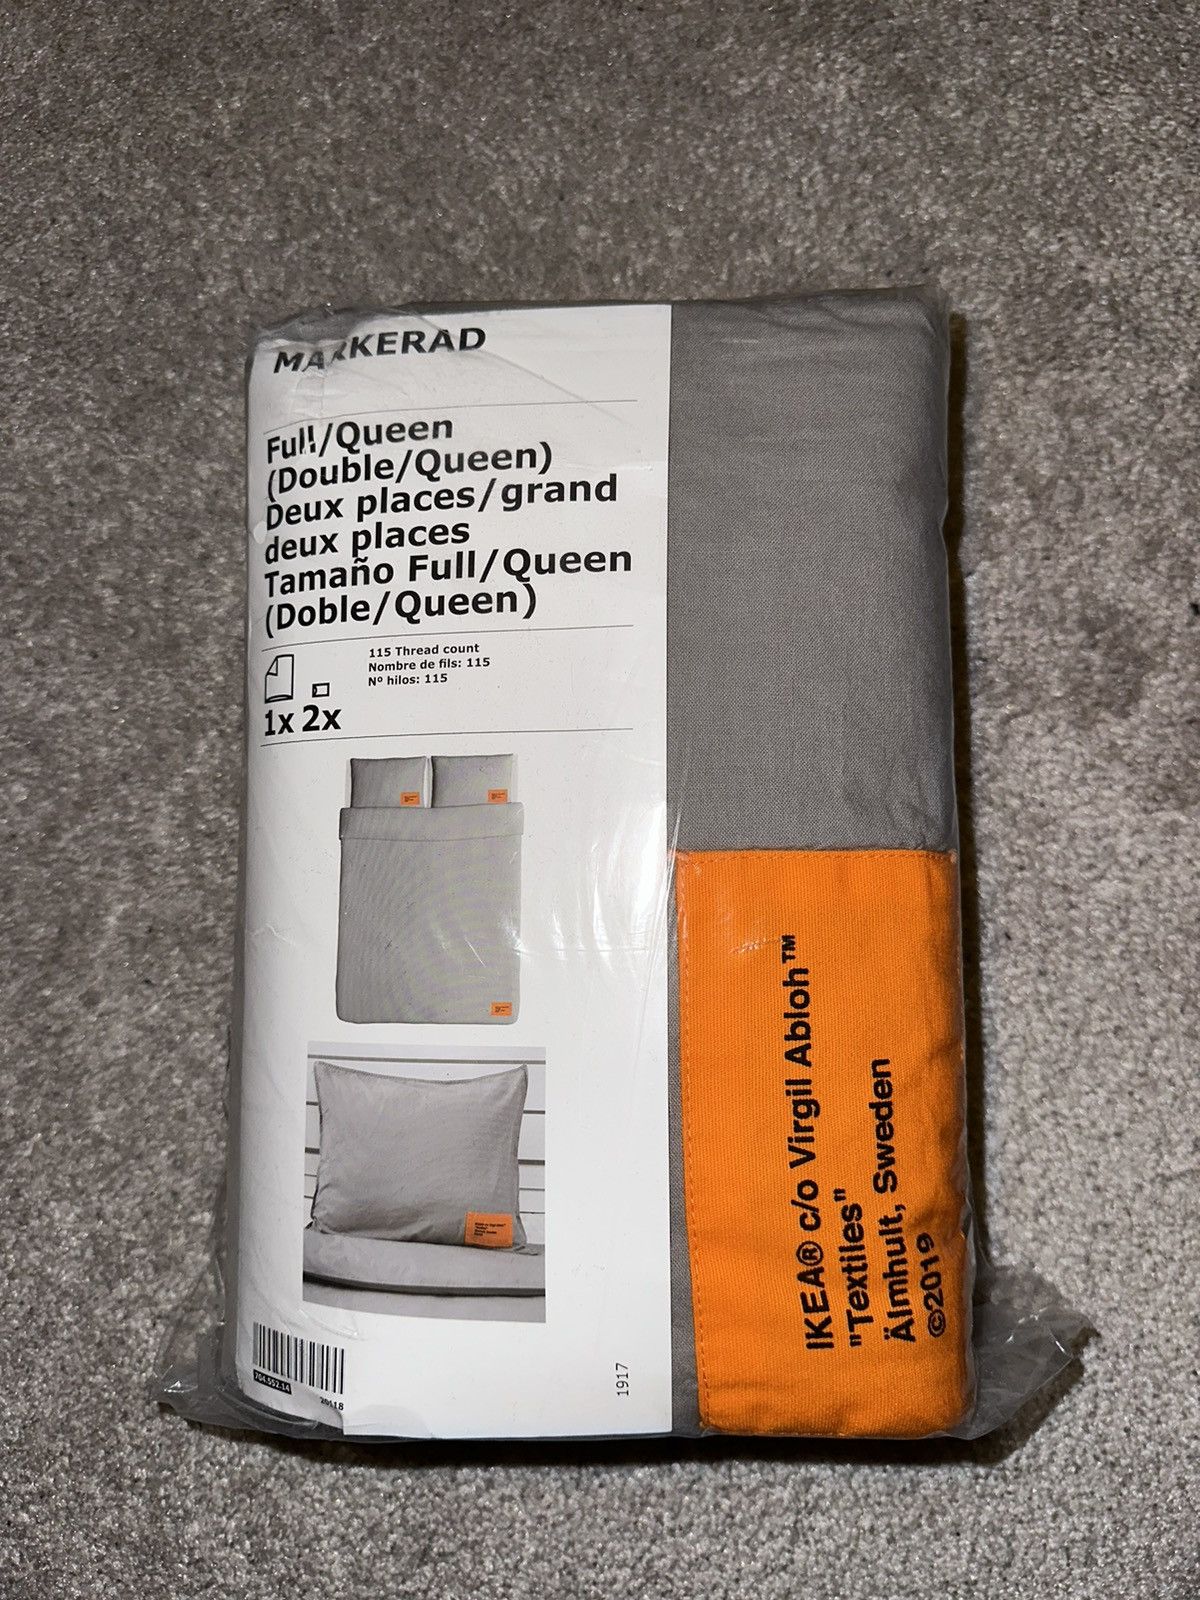 IKEA Virgil Abloh Markerad Full/Queen Bed Duvet Cover And 2 Pillow Cases